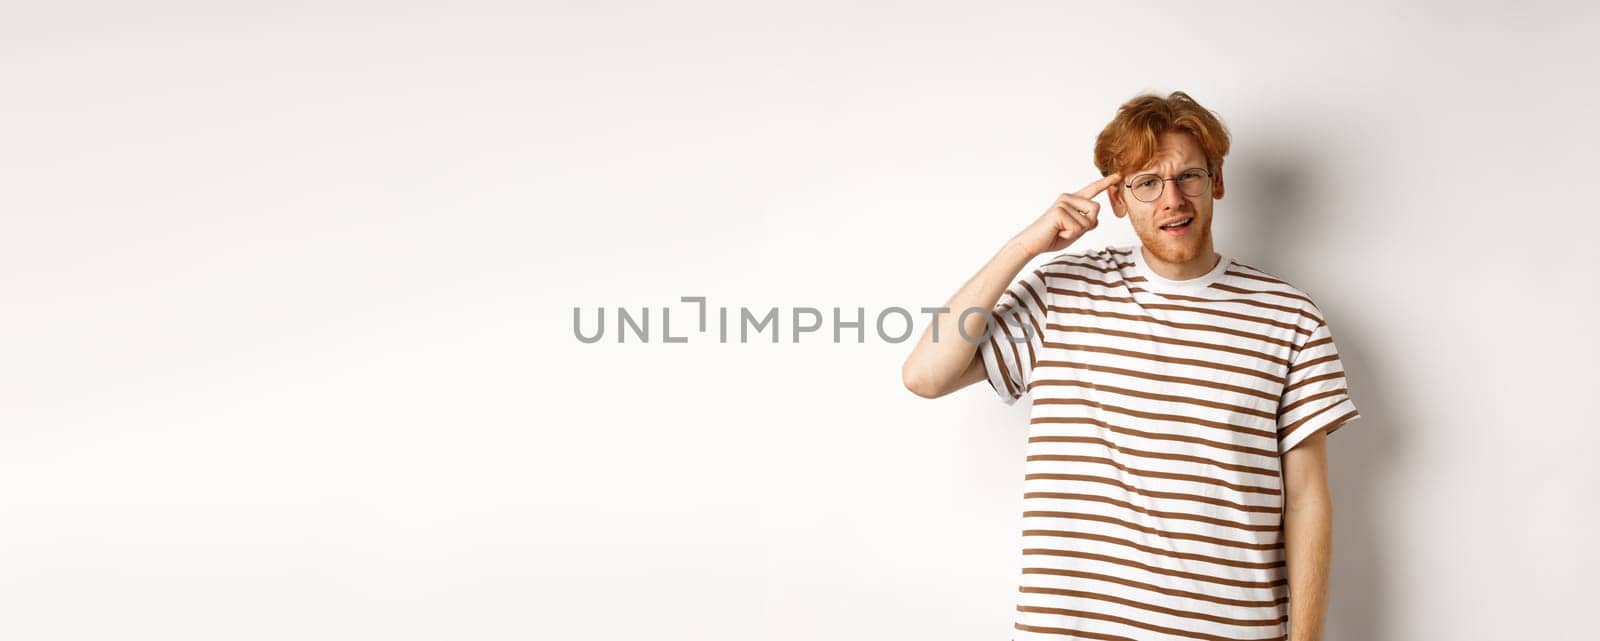 Annoyed young man with red hair scolding person for being stupid, pointing at head and staring at camera, white background.